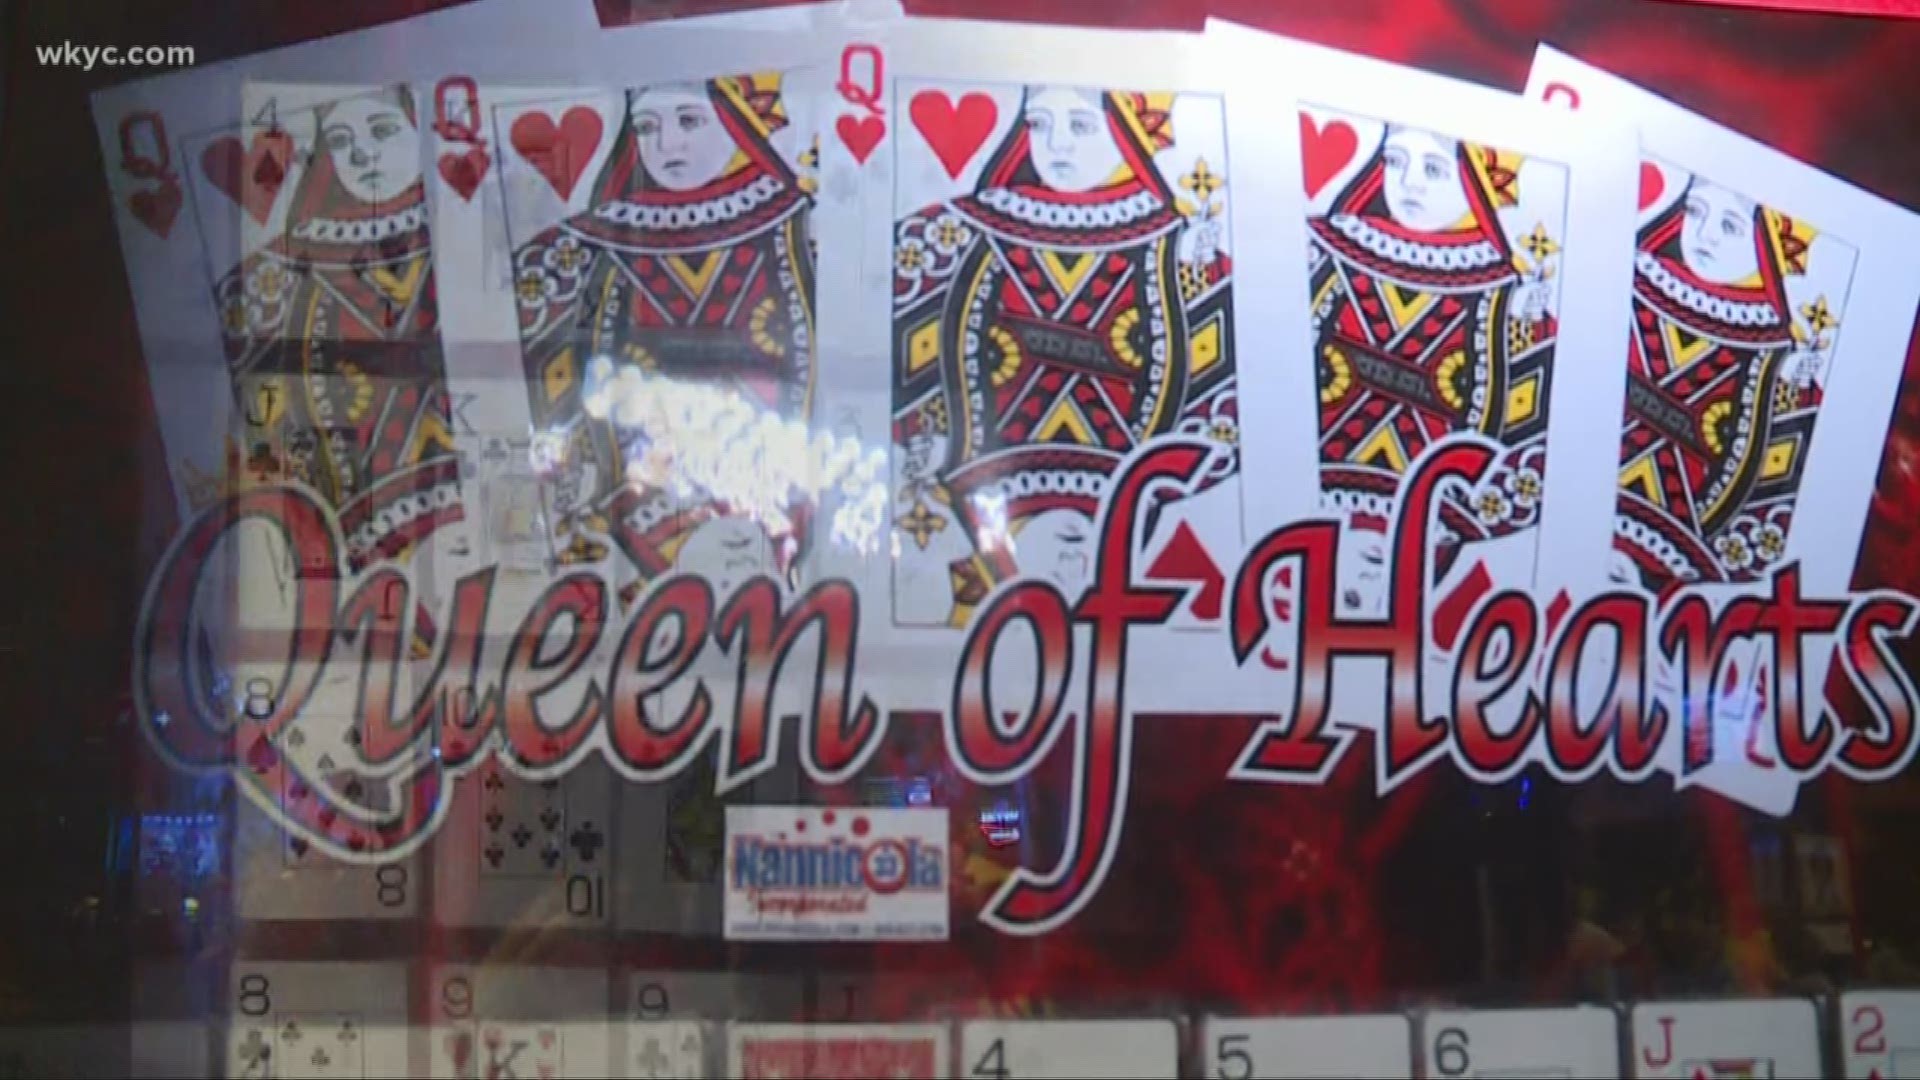 Queen of Hearts finally drawn in Grayton Road Tavern's game; Winner